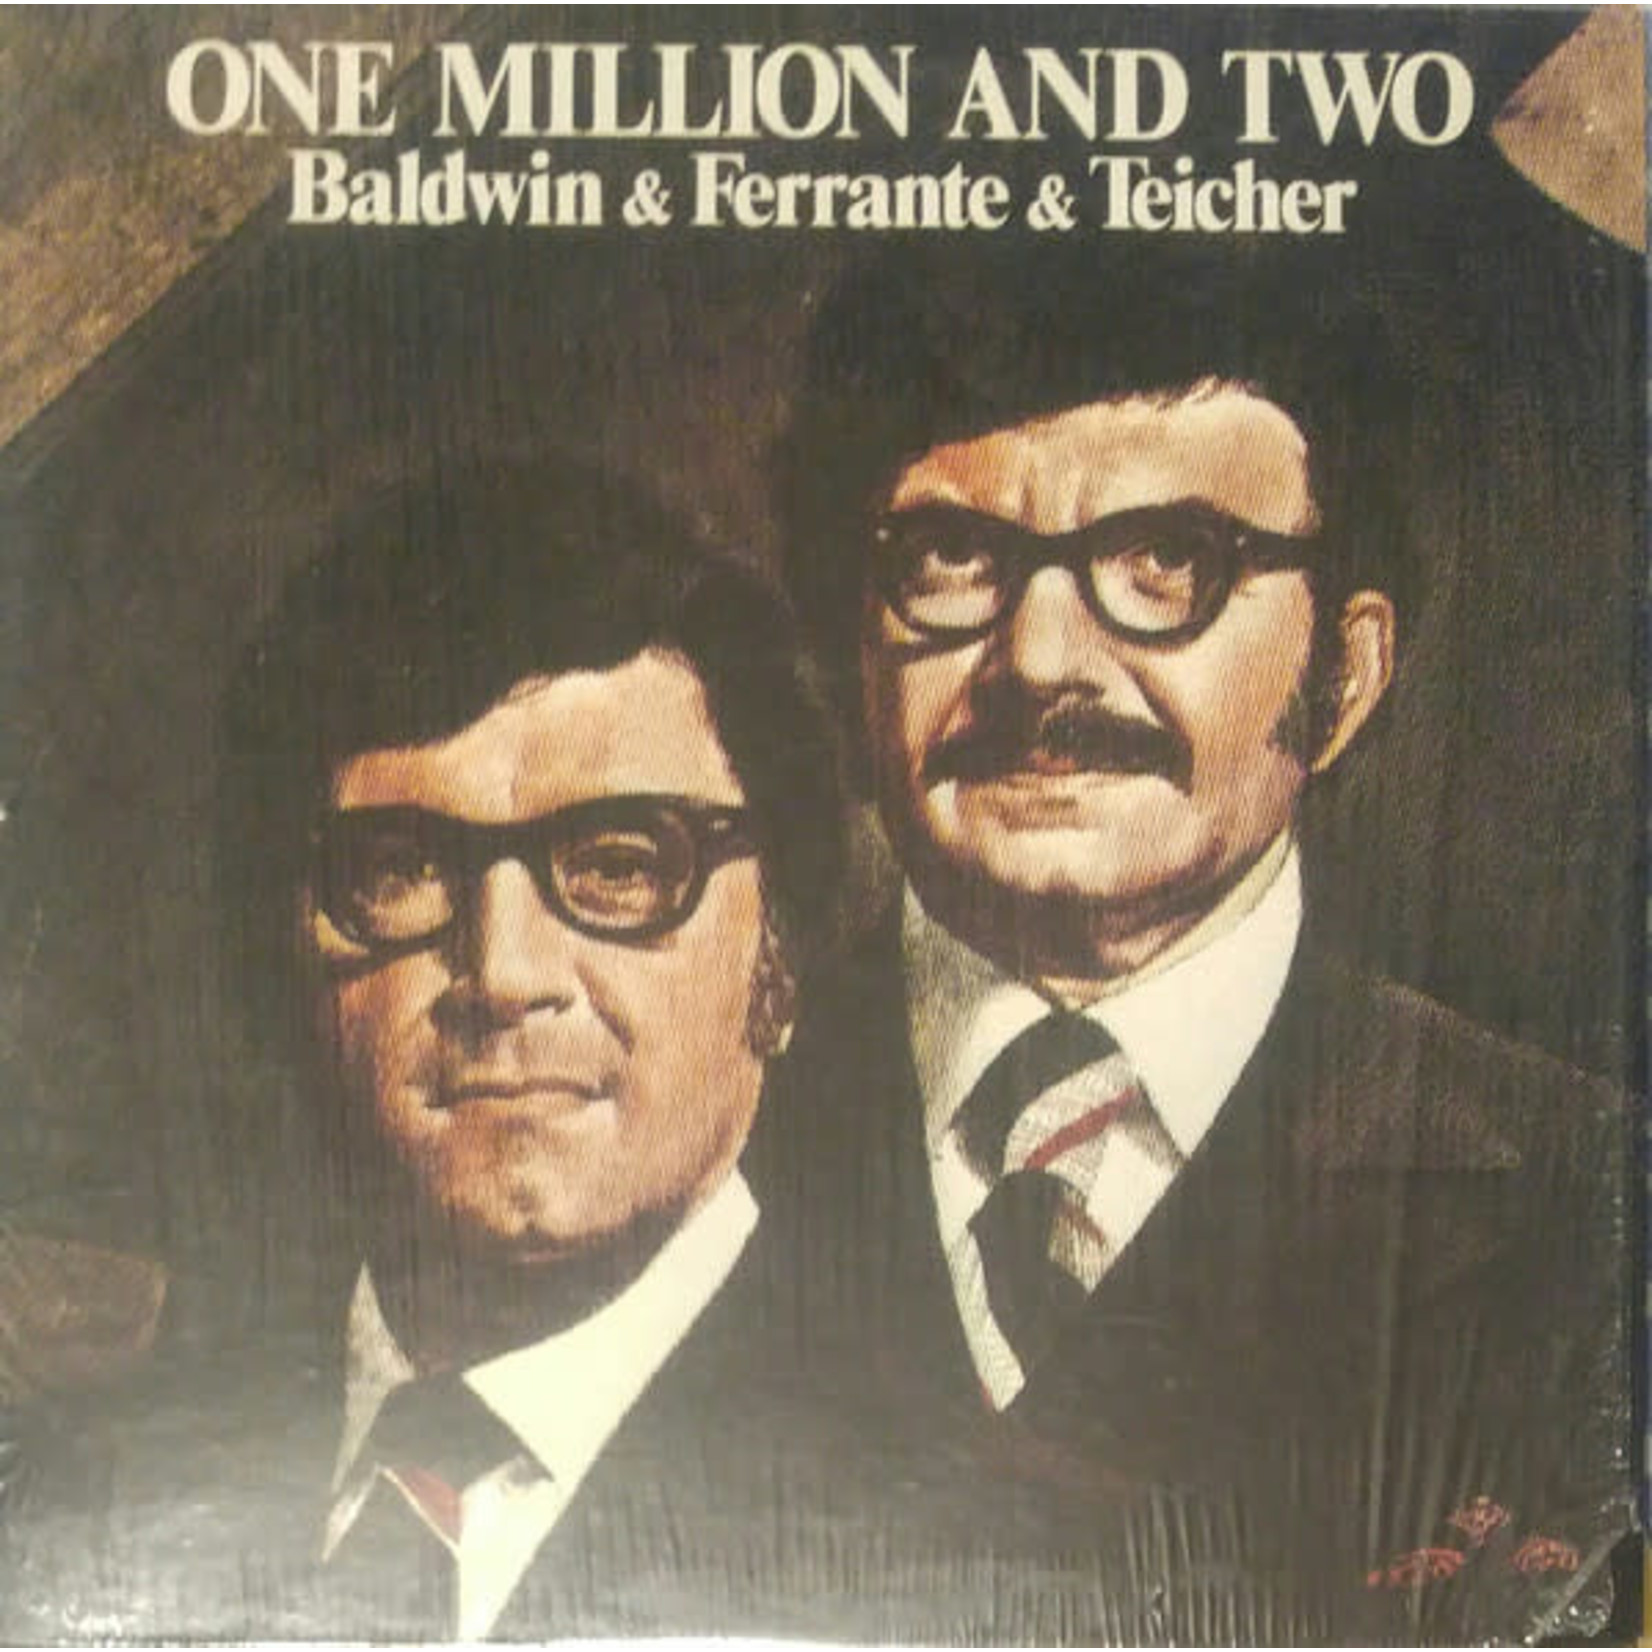 Ferrante & Teicher Ferrante & Teicher – One Million And Two (VG, 1973, LP, United Artists Records Special Projects – USLP-0004))